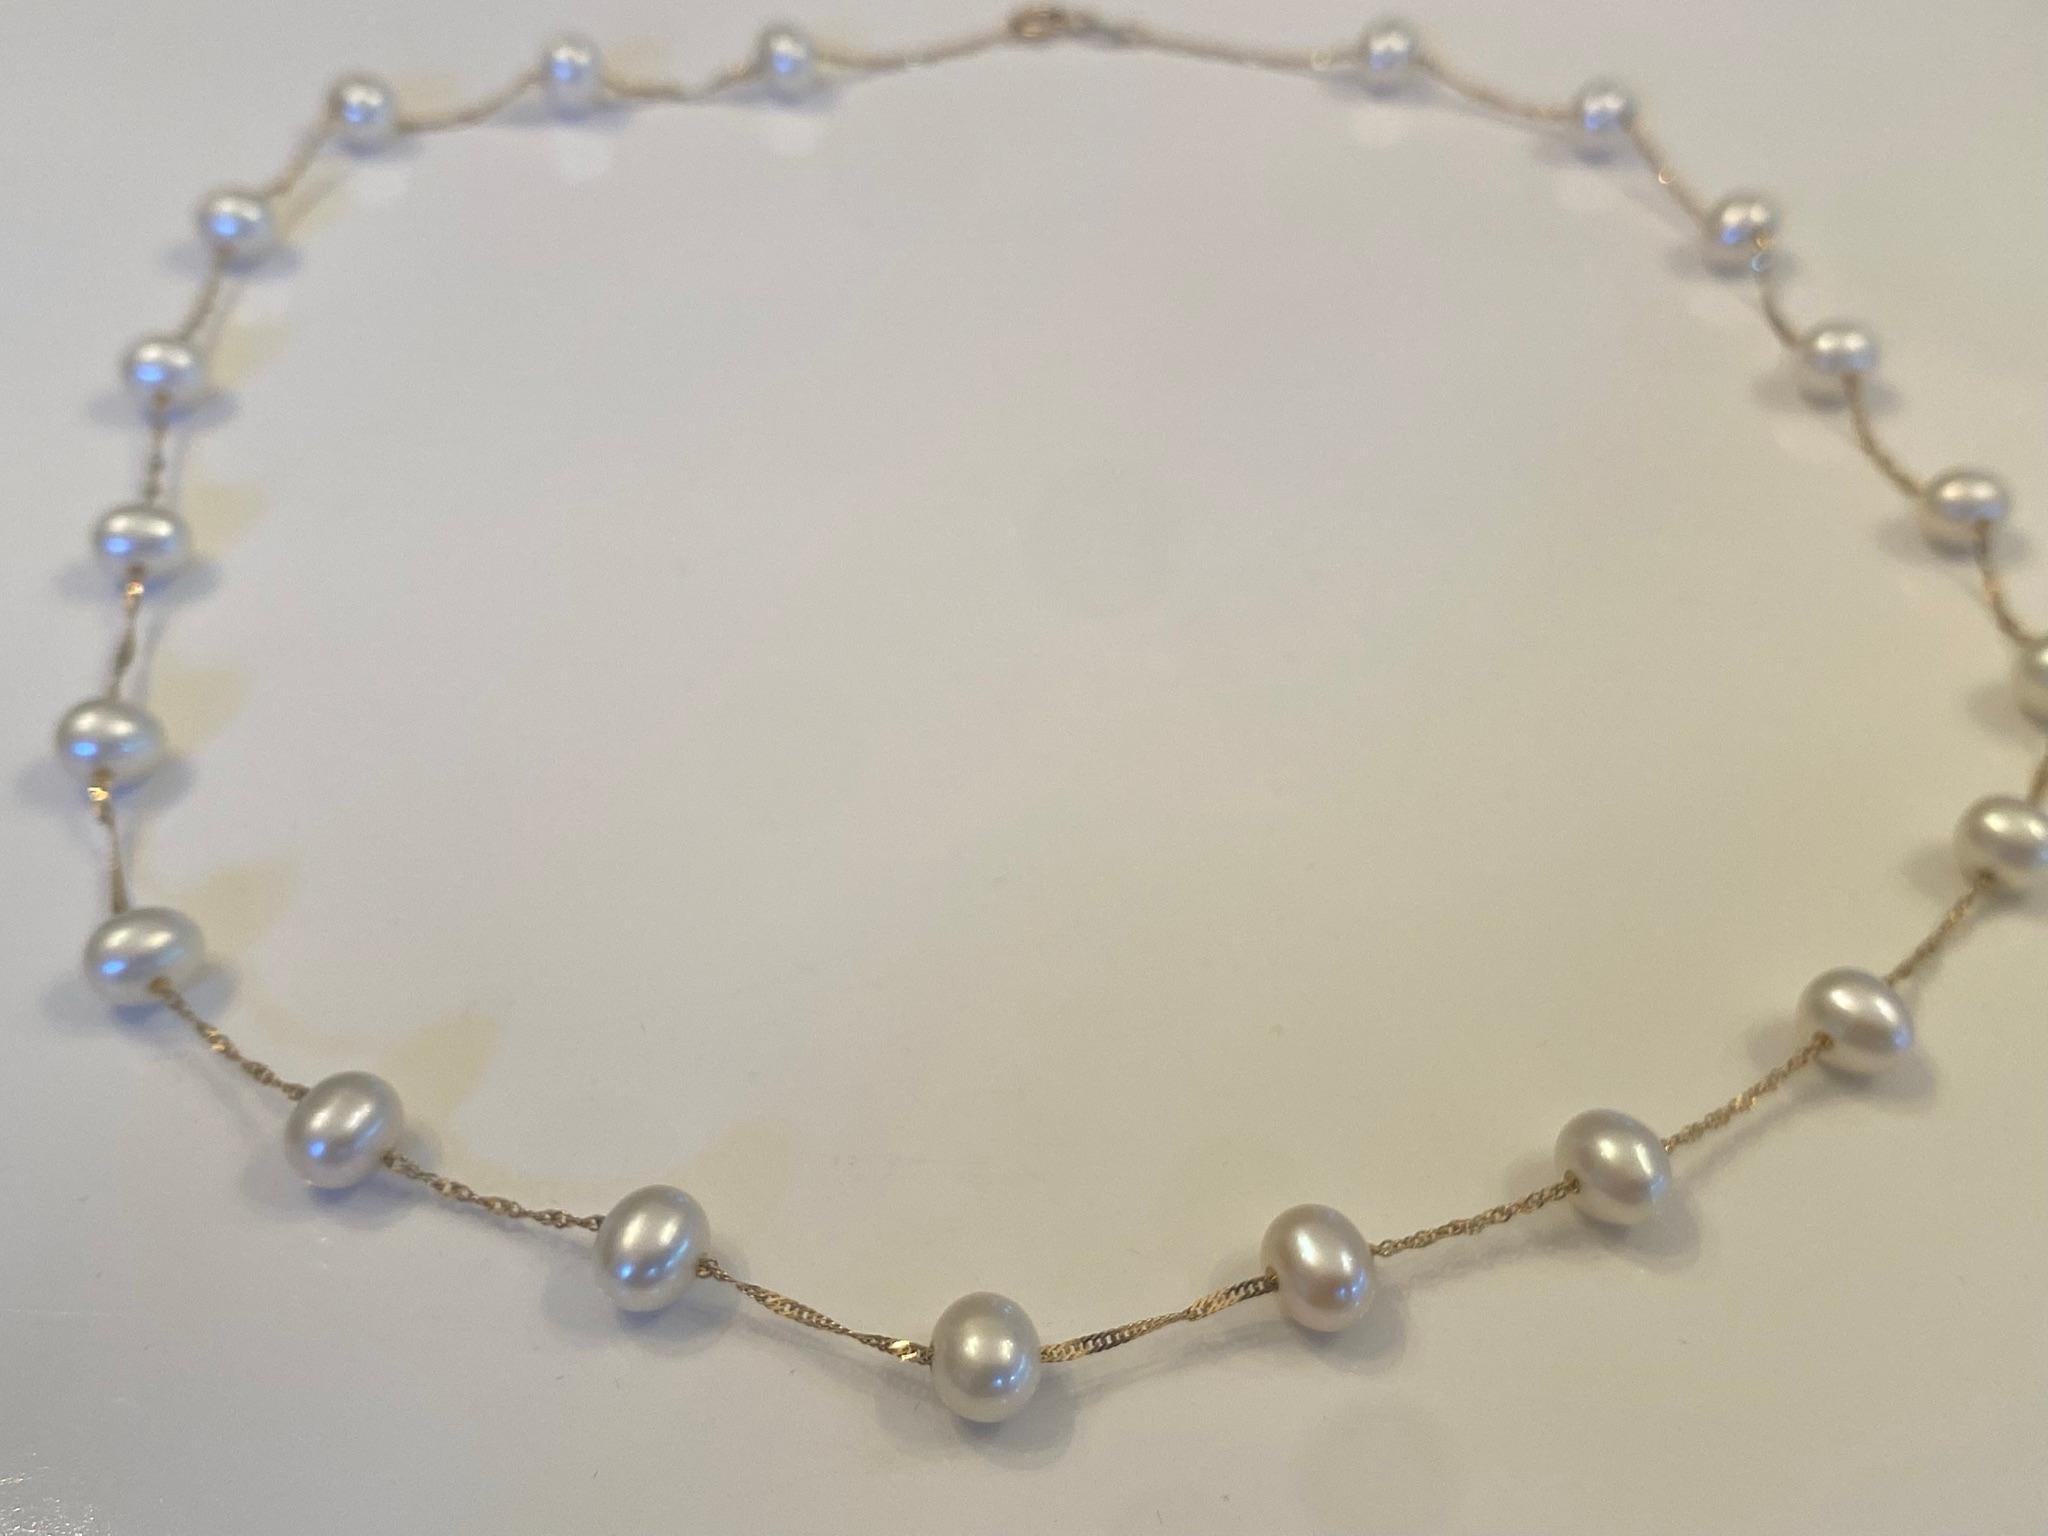 This delicate chain necklace crafted in 14kt yellow gold features twenty-one fresh water white pearls each measuring approximately 6mm X 6.5mm. The necklace measures 18 inches long. 
